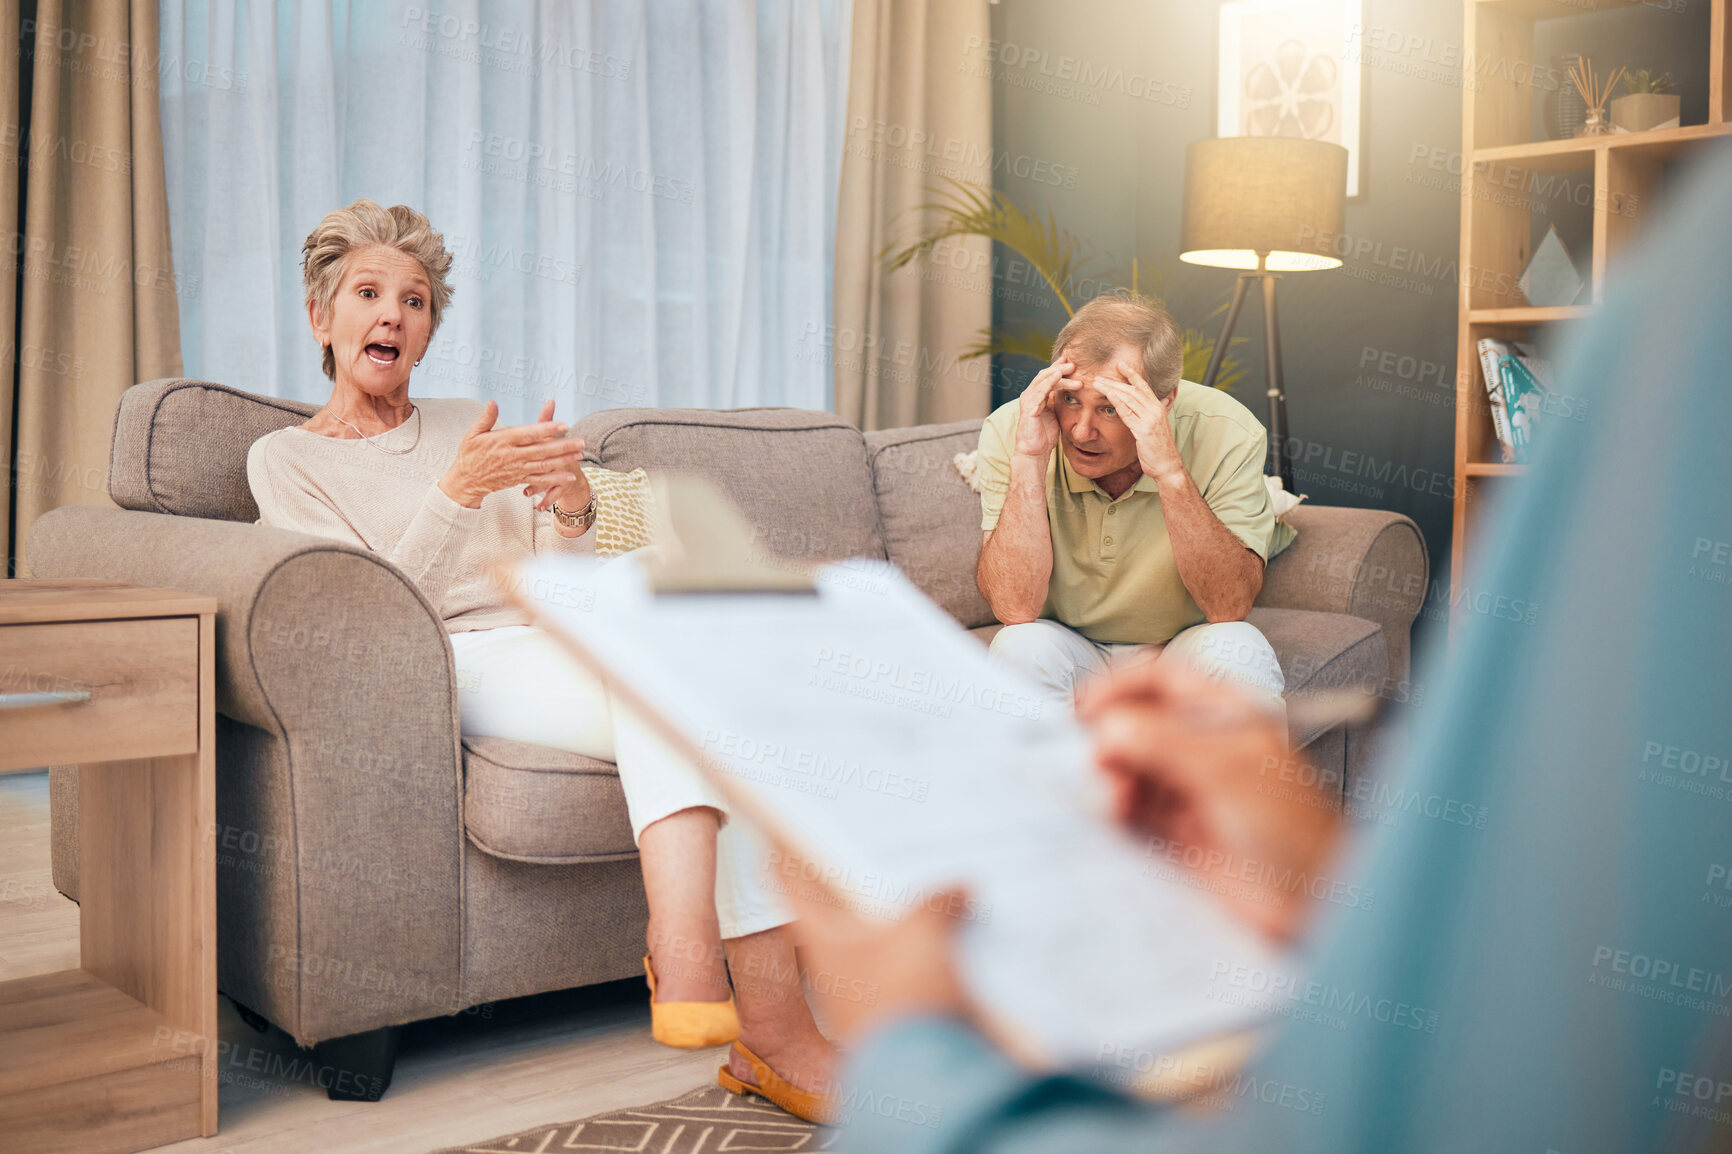 Buy stock photo Retirement couple and divorce psychologist consulting angry, frustrated and unhappy people in marriage. Conflict, counselling and married senior woman explaining problem to mental health therapist.

